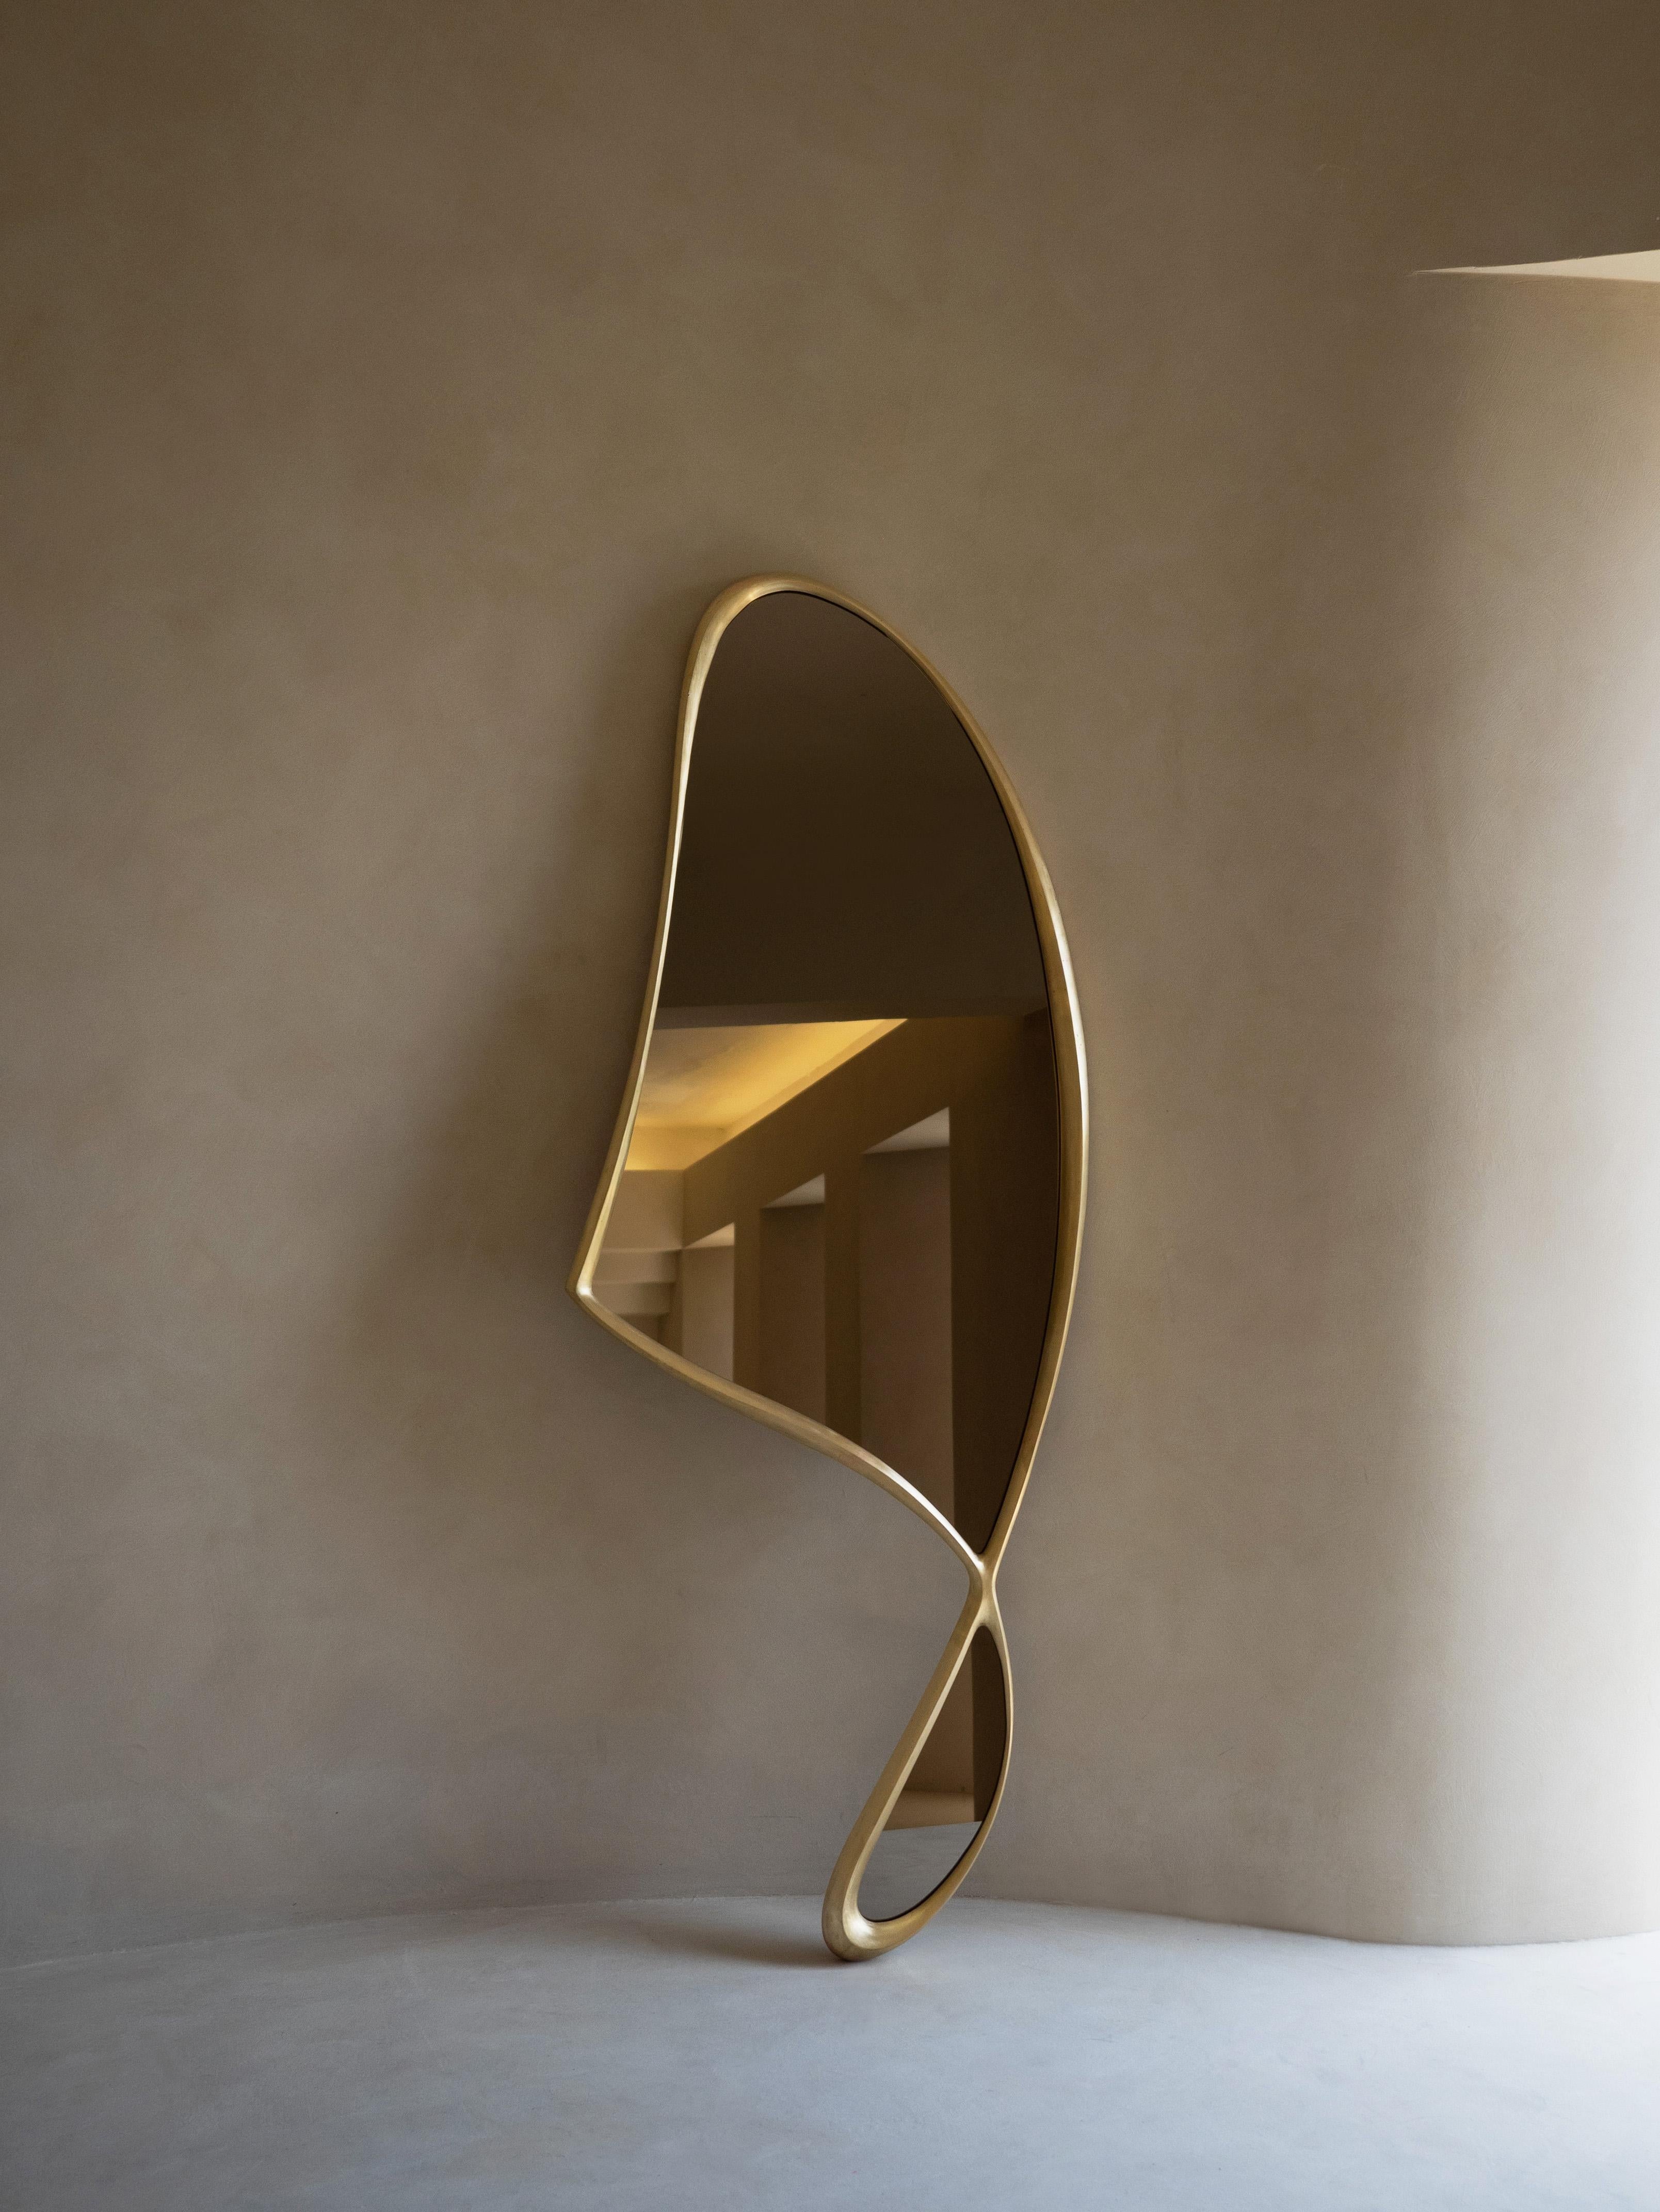 'Momentum Mirror II' by Soo Joo is a statement cast bronze wall mirror with a unique and timeless asymmetric form. The sculptural distilled form elevates any space. It hangs flush to the wall with custom-made steel French cleats, and can be hung